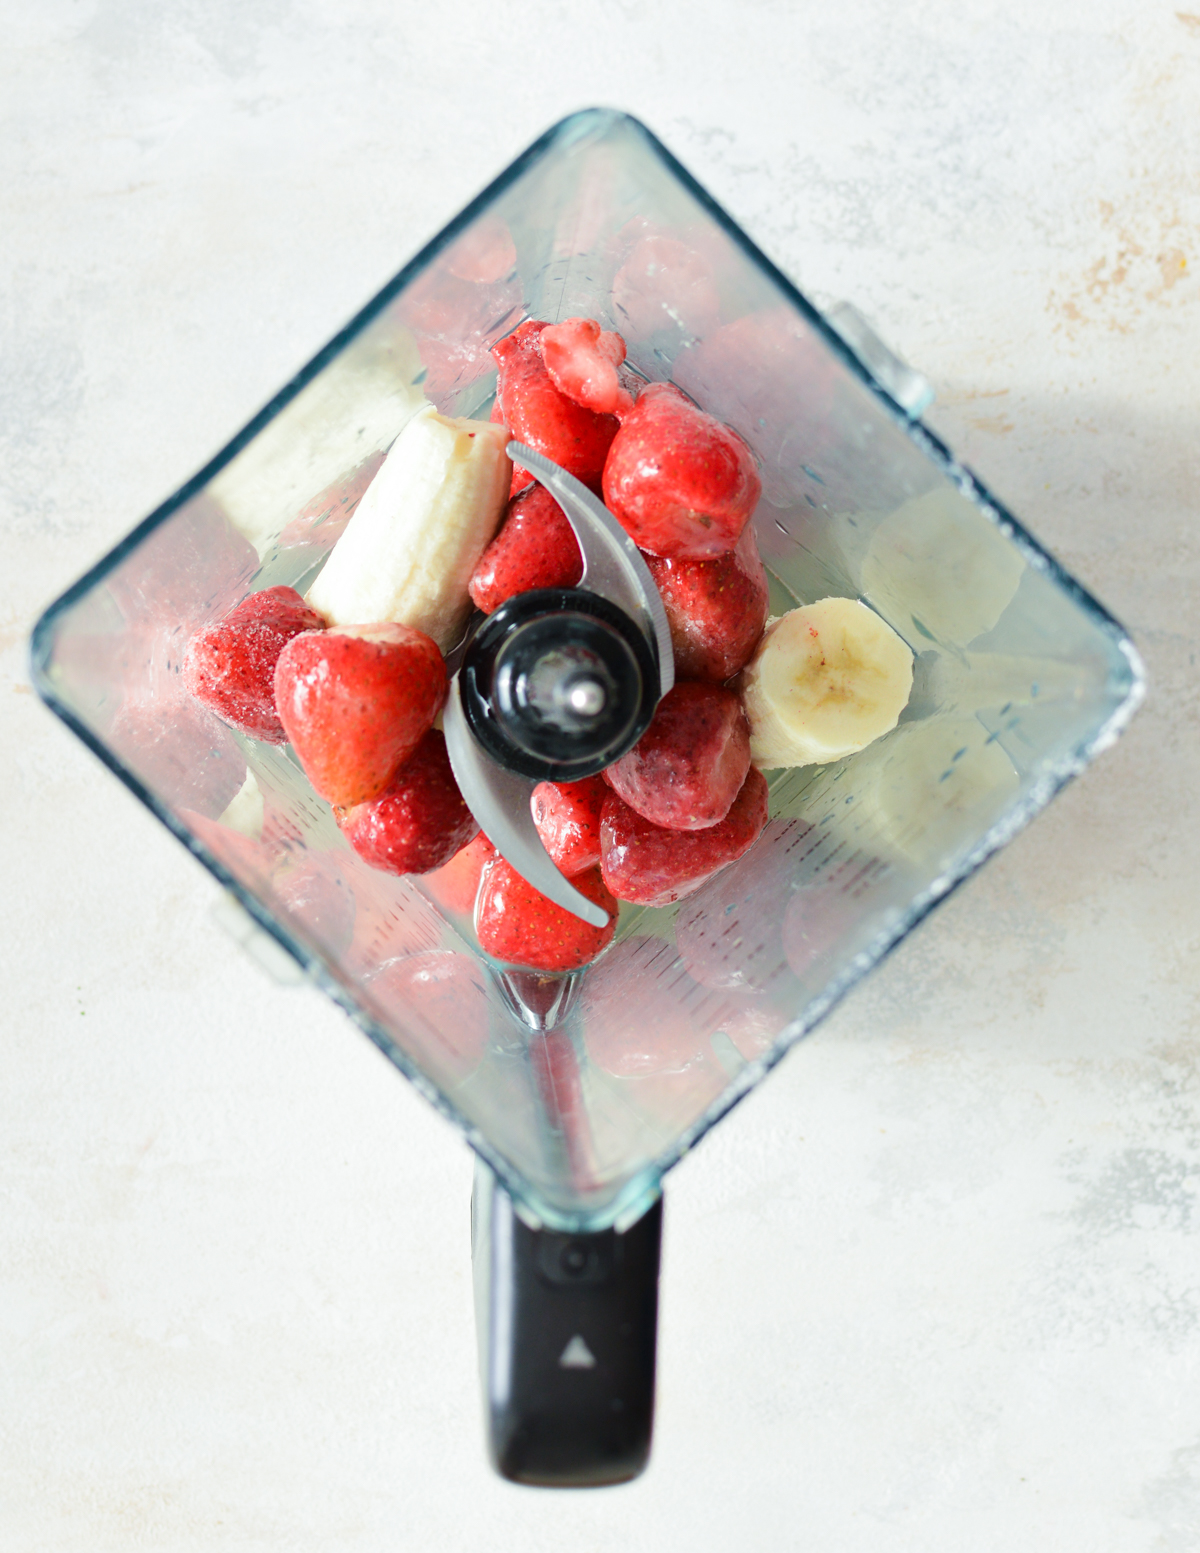 strawberries, banana, and cucumber in a blender.